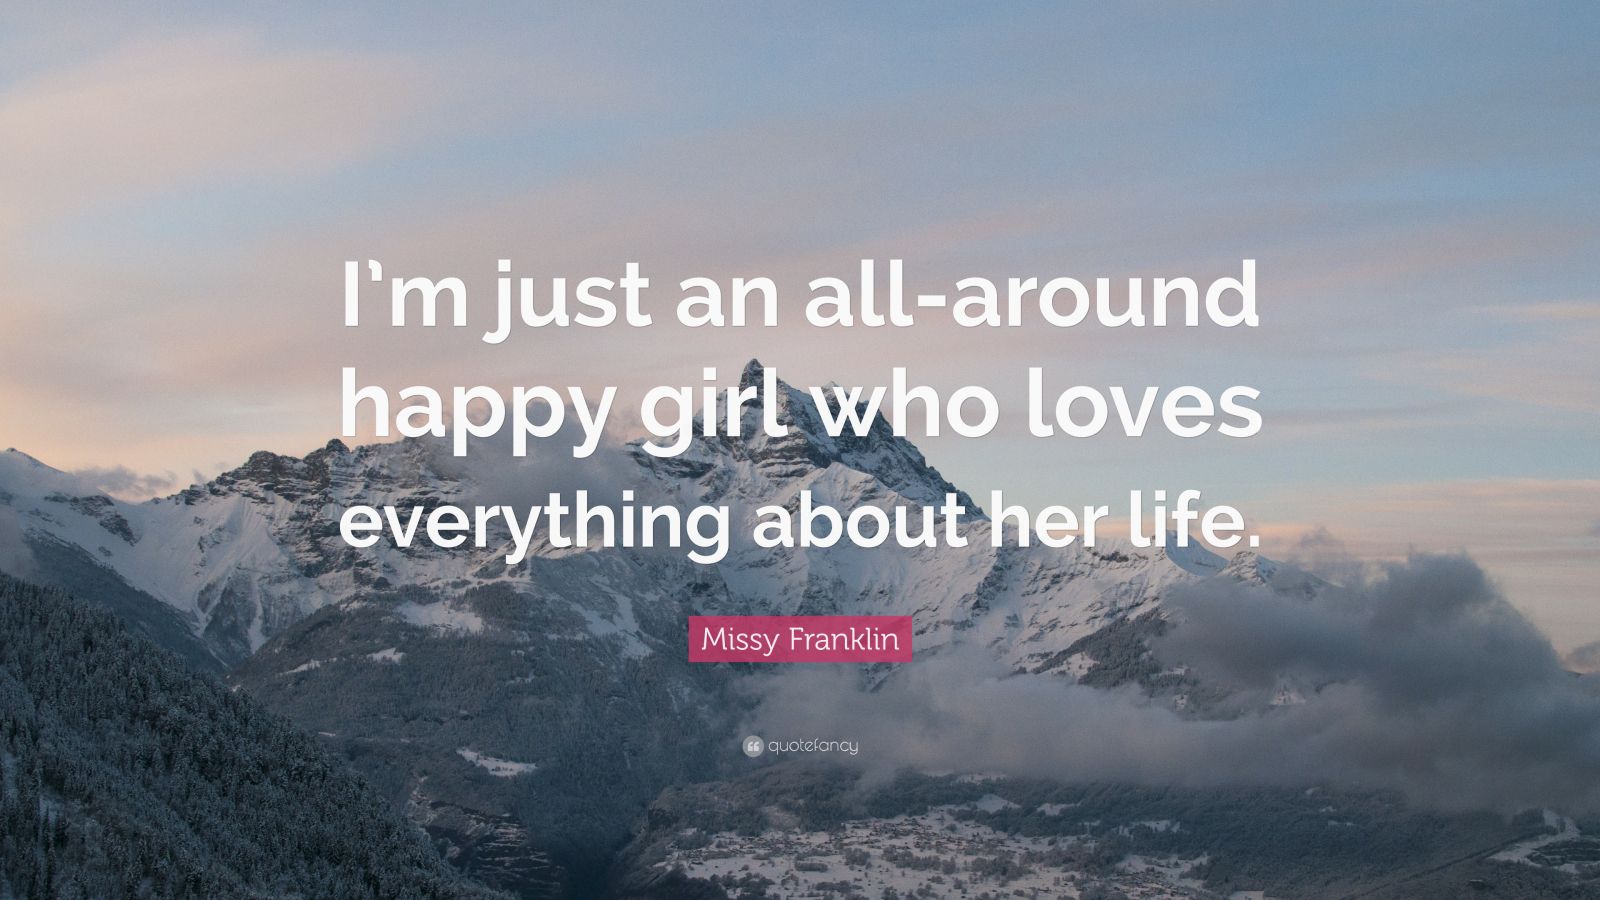 Missy Franklin Quote: “I'm just an all-around happy girl who loves  everything about her life.”